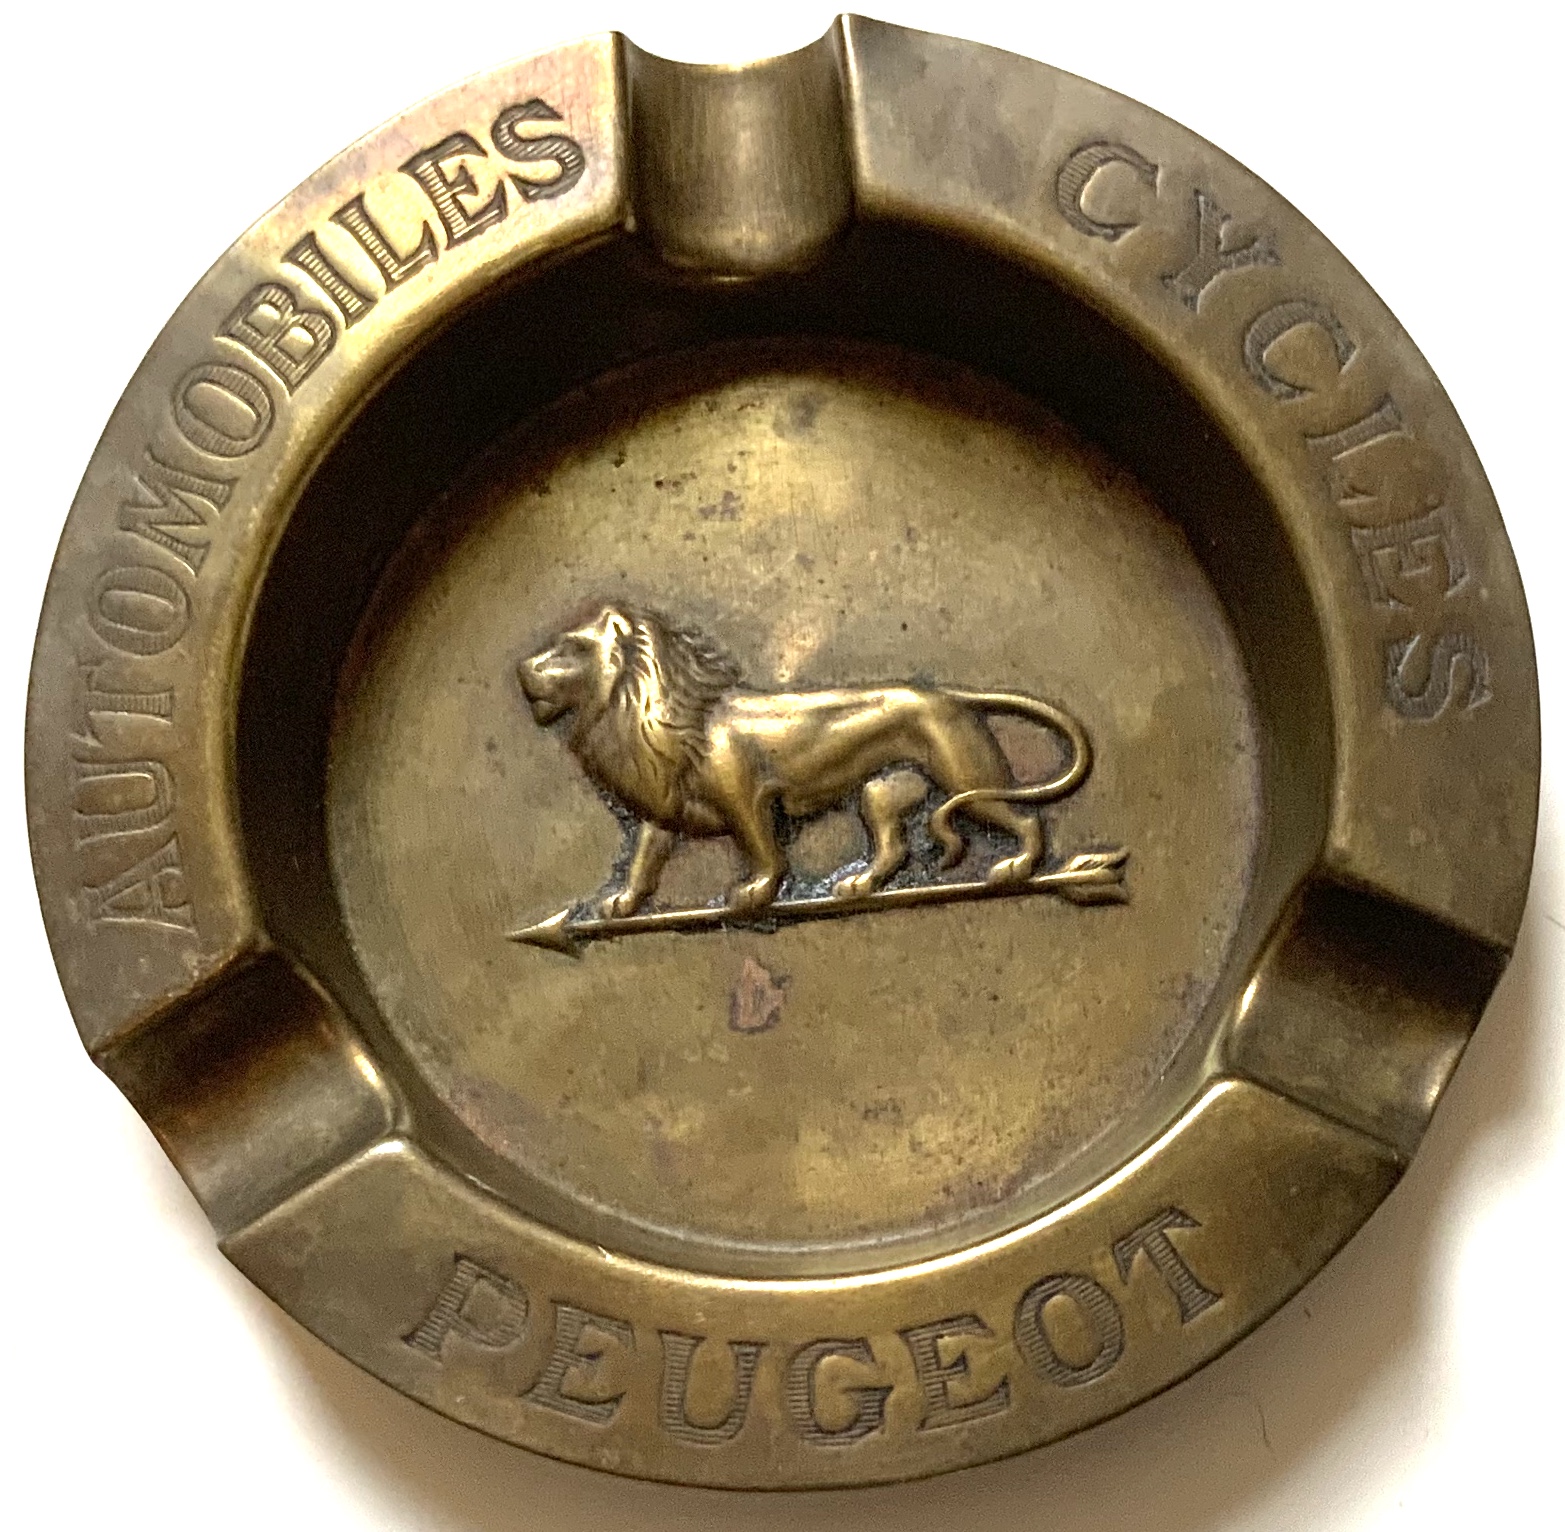 J831	PEUGEOT AUTOMOBILES AND CYCLES ADVERTISING ASHTRAY - COPPER